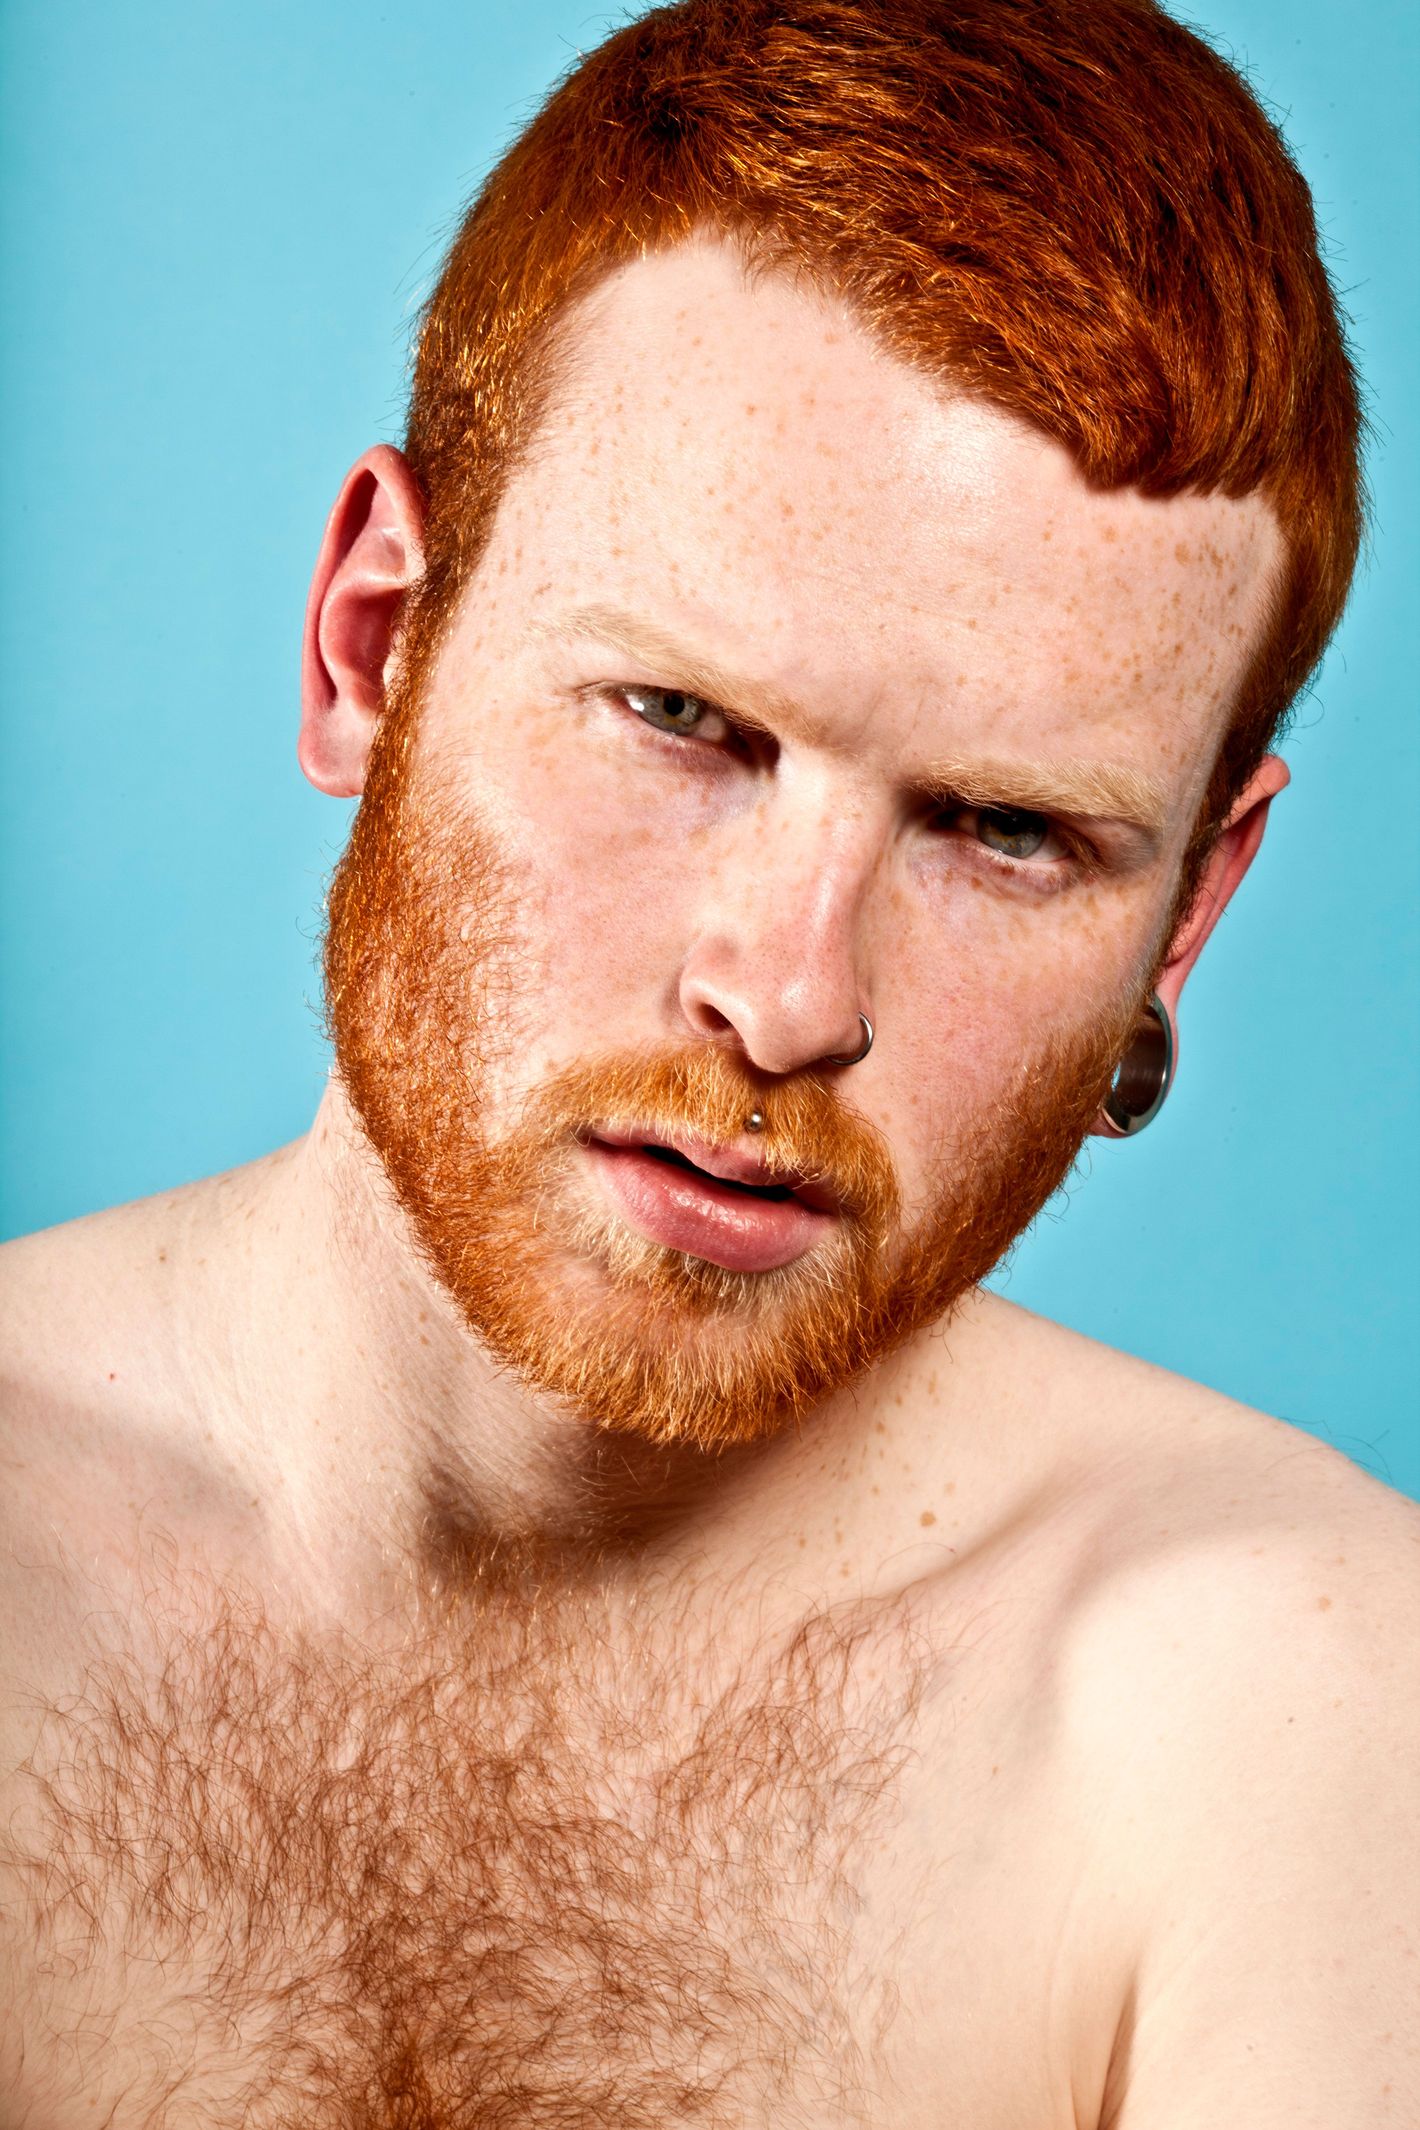 Gay red head